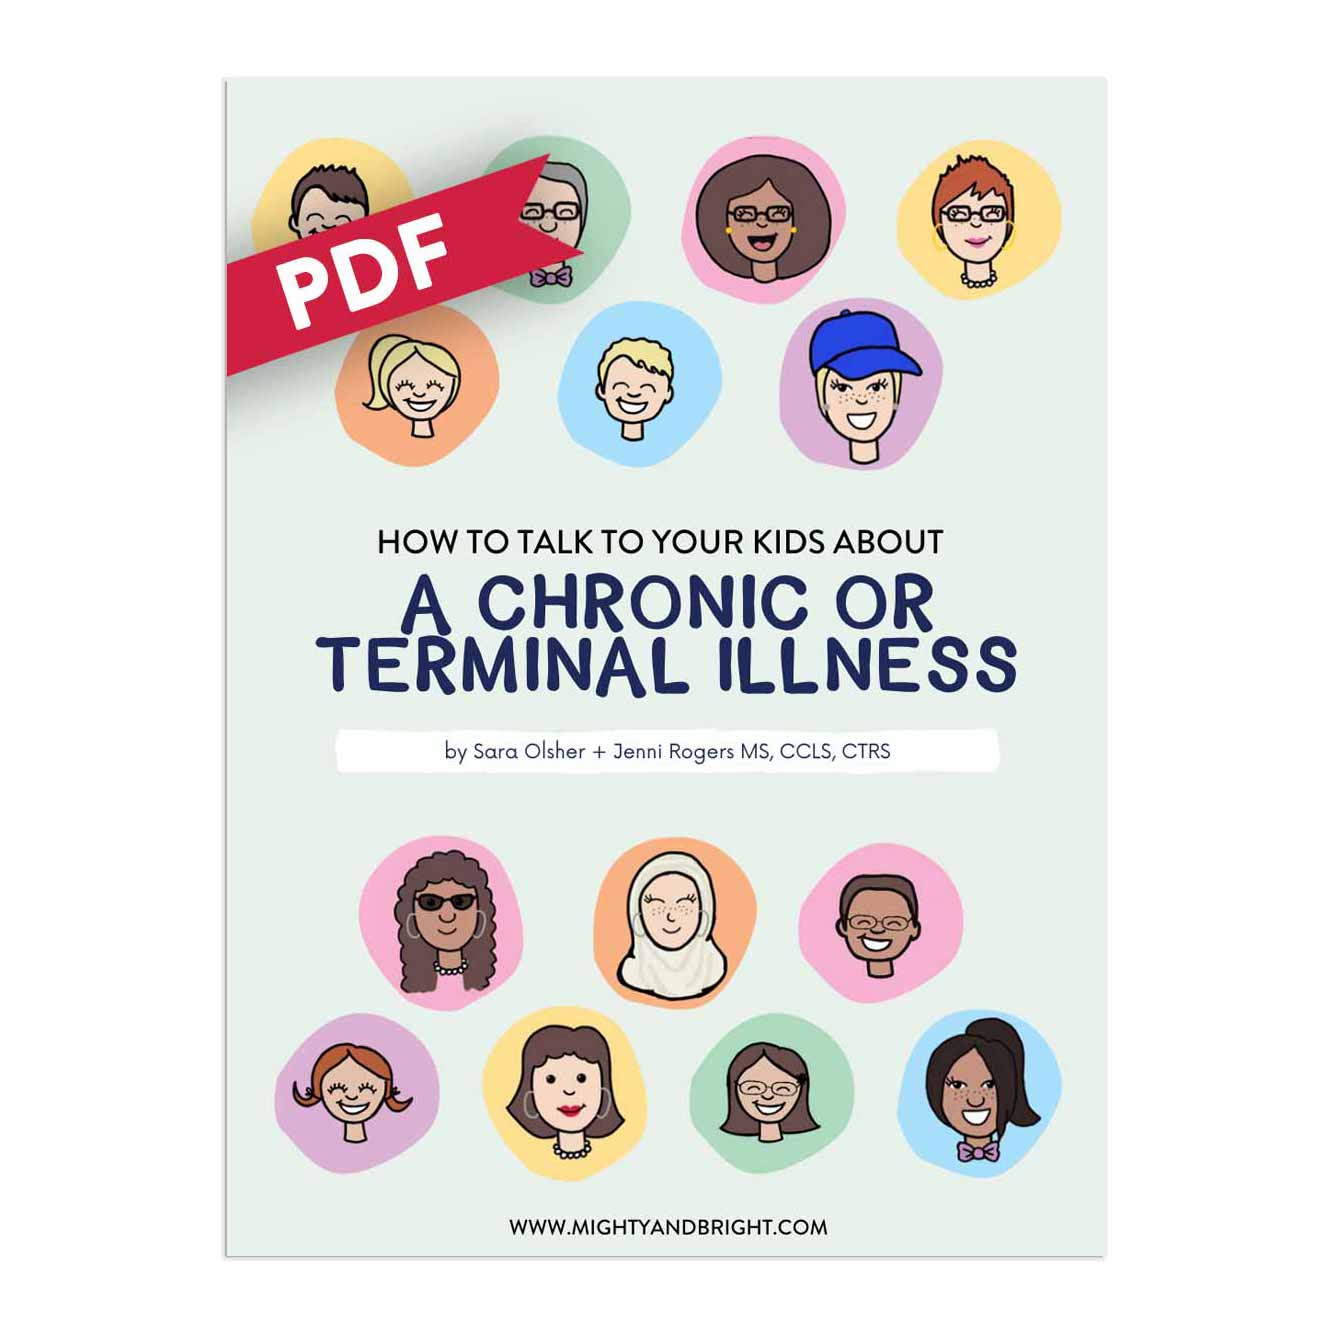 eBook: How to Talk to Your Kids About a Chronic or Terminal Illness